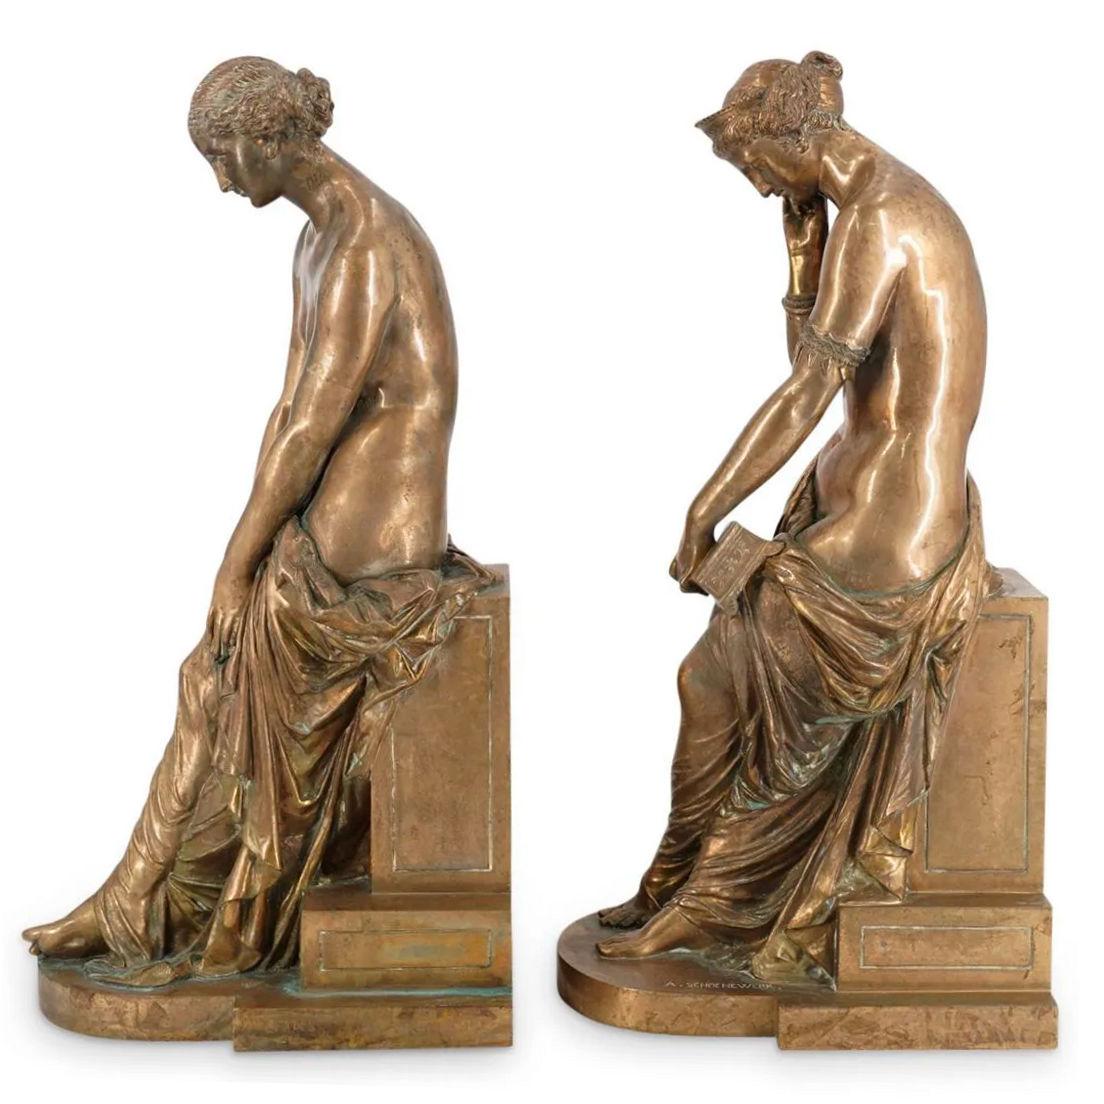 Pair of very fine quality 19 century French Neoclassical Gilt Bronze Figures by Pierre Alexandre Schoenewerk (1820-1885).